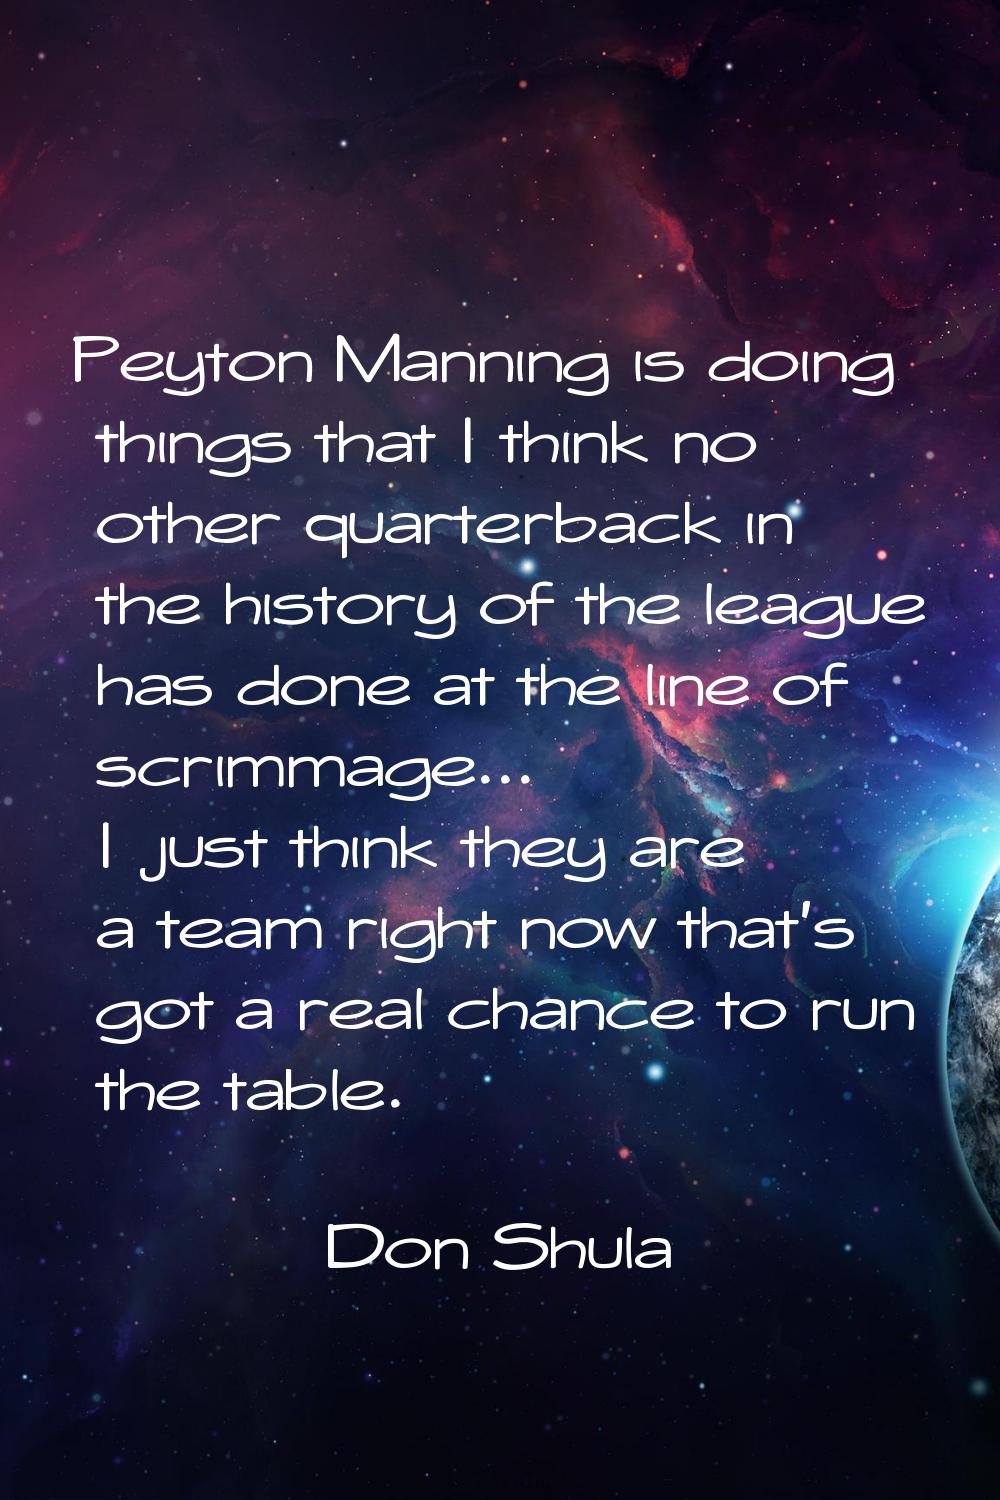 Peyton Manning is doing things that I think no other quarterback in the history of the league has d